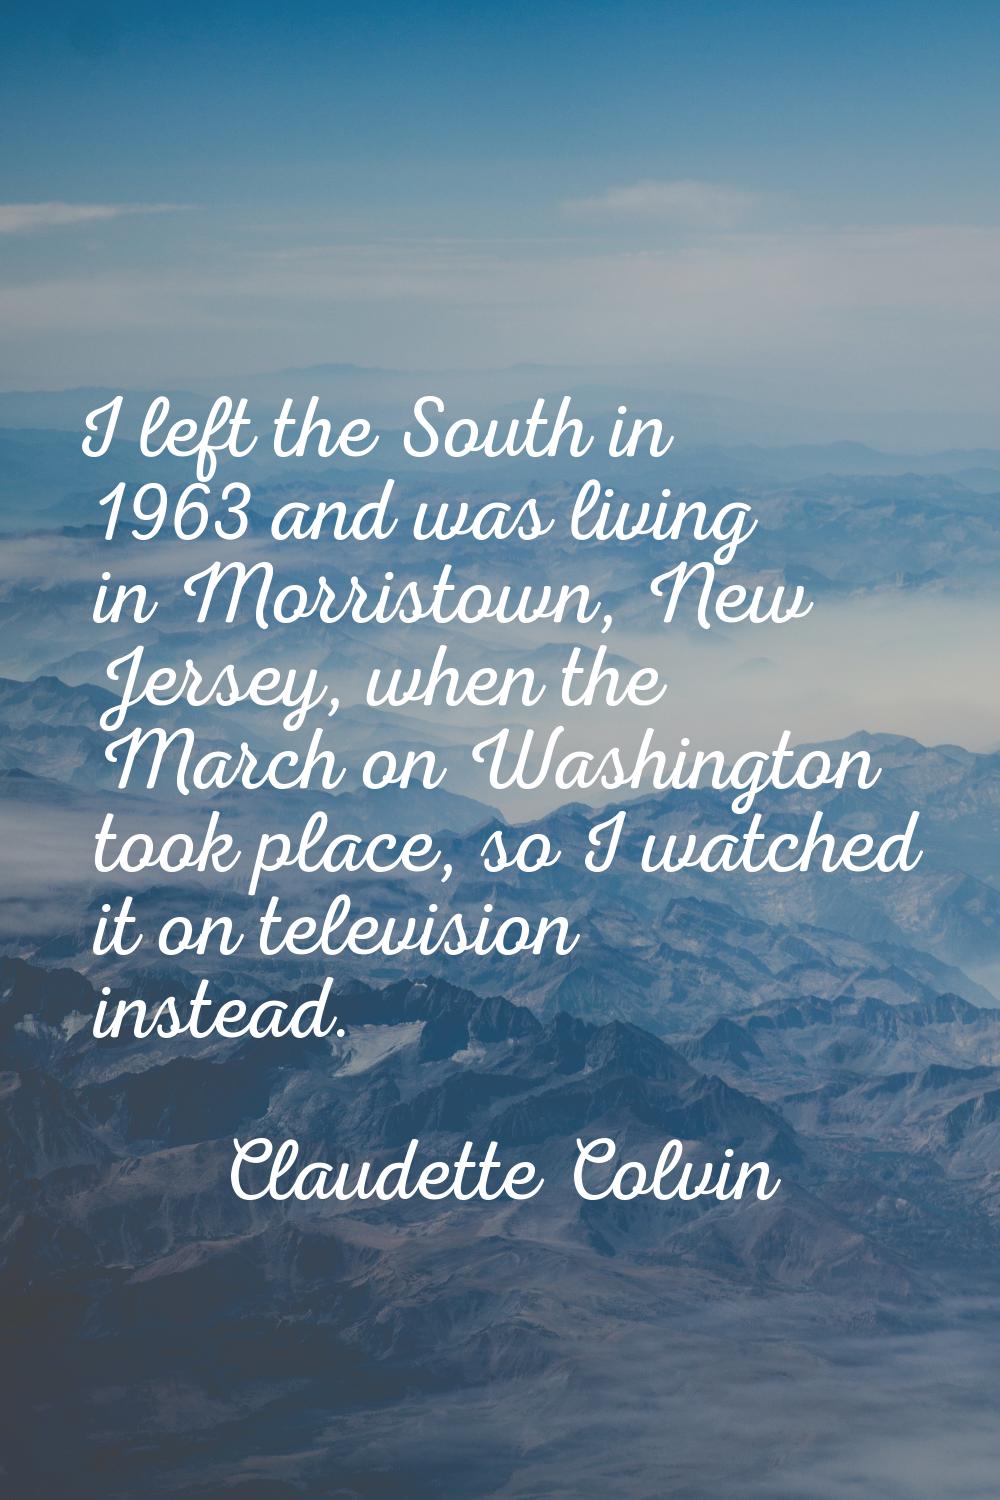 I left the South in 1963 and was living in Morristown, New Jersey, when the March on Washington too